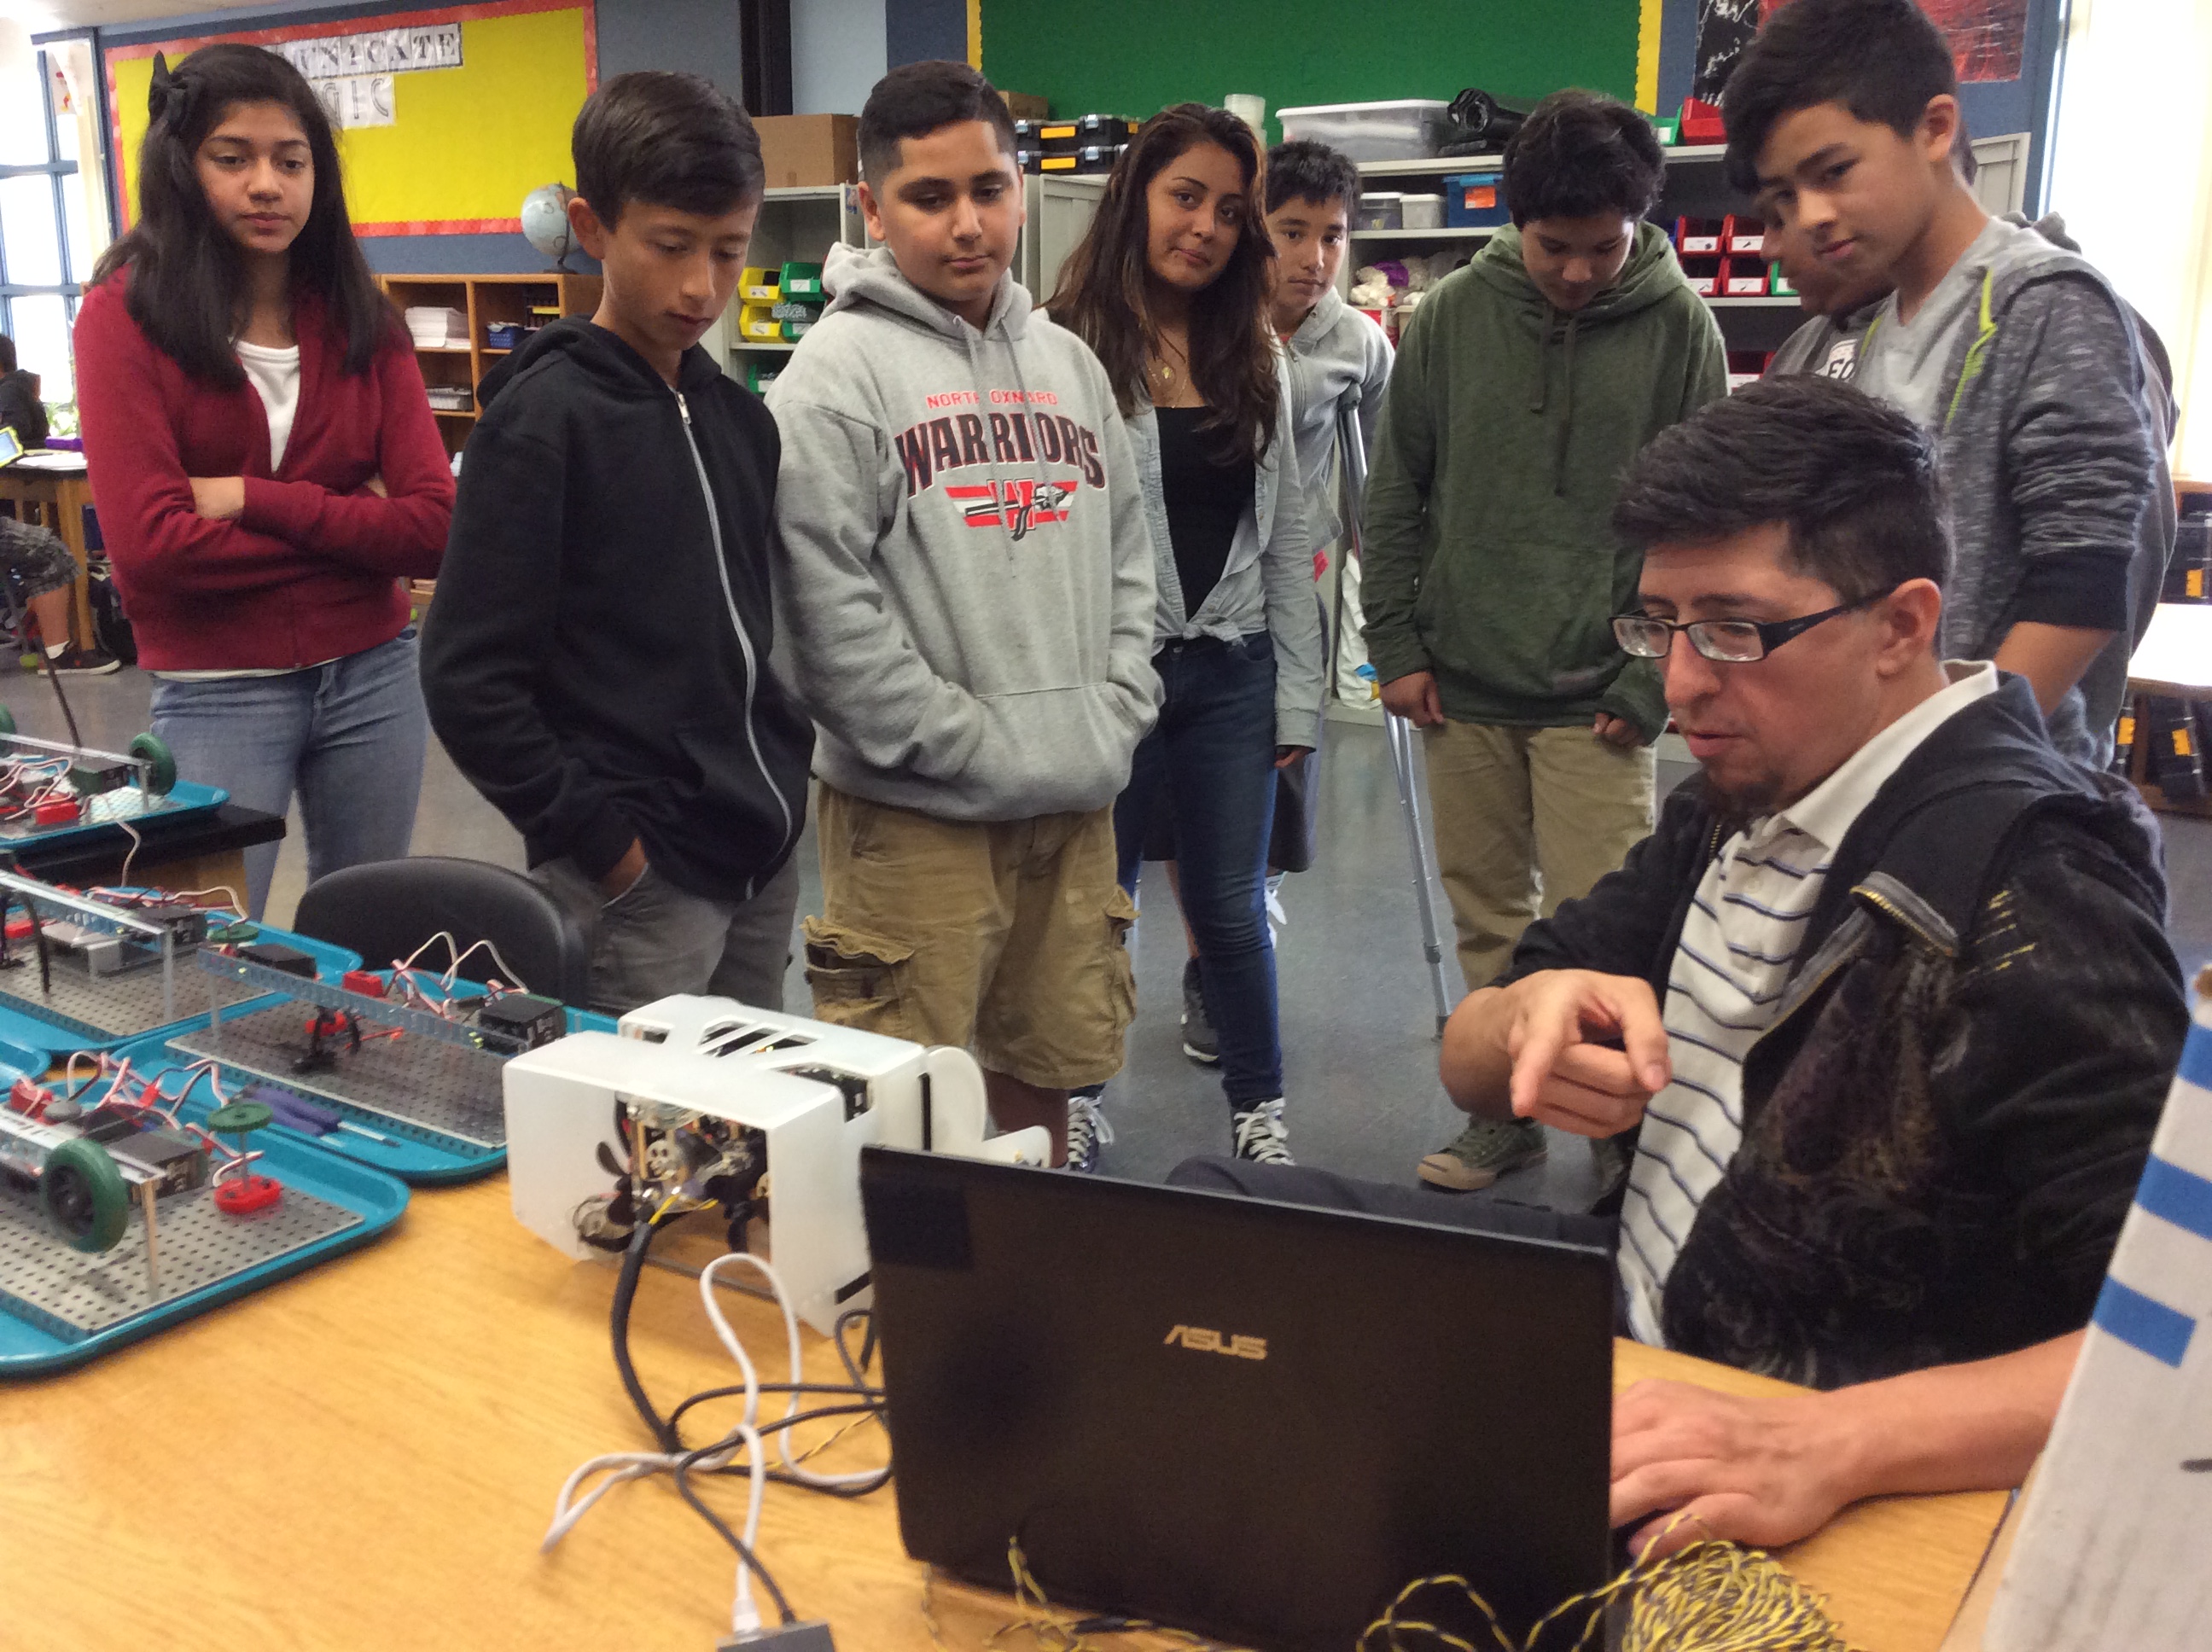 Paul spoke to the VEX robotics students about using ROVs for environmental research.